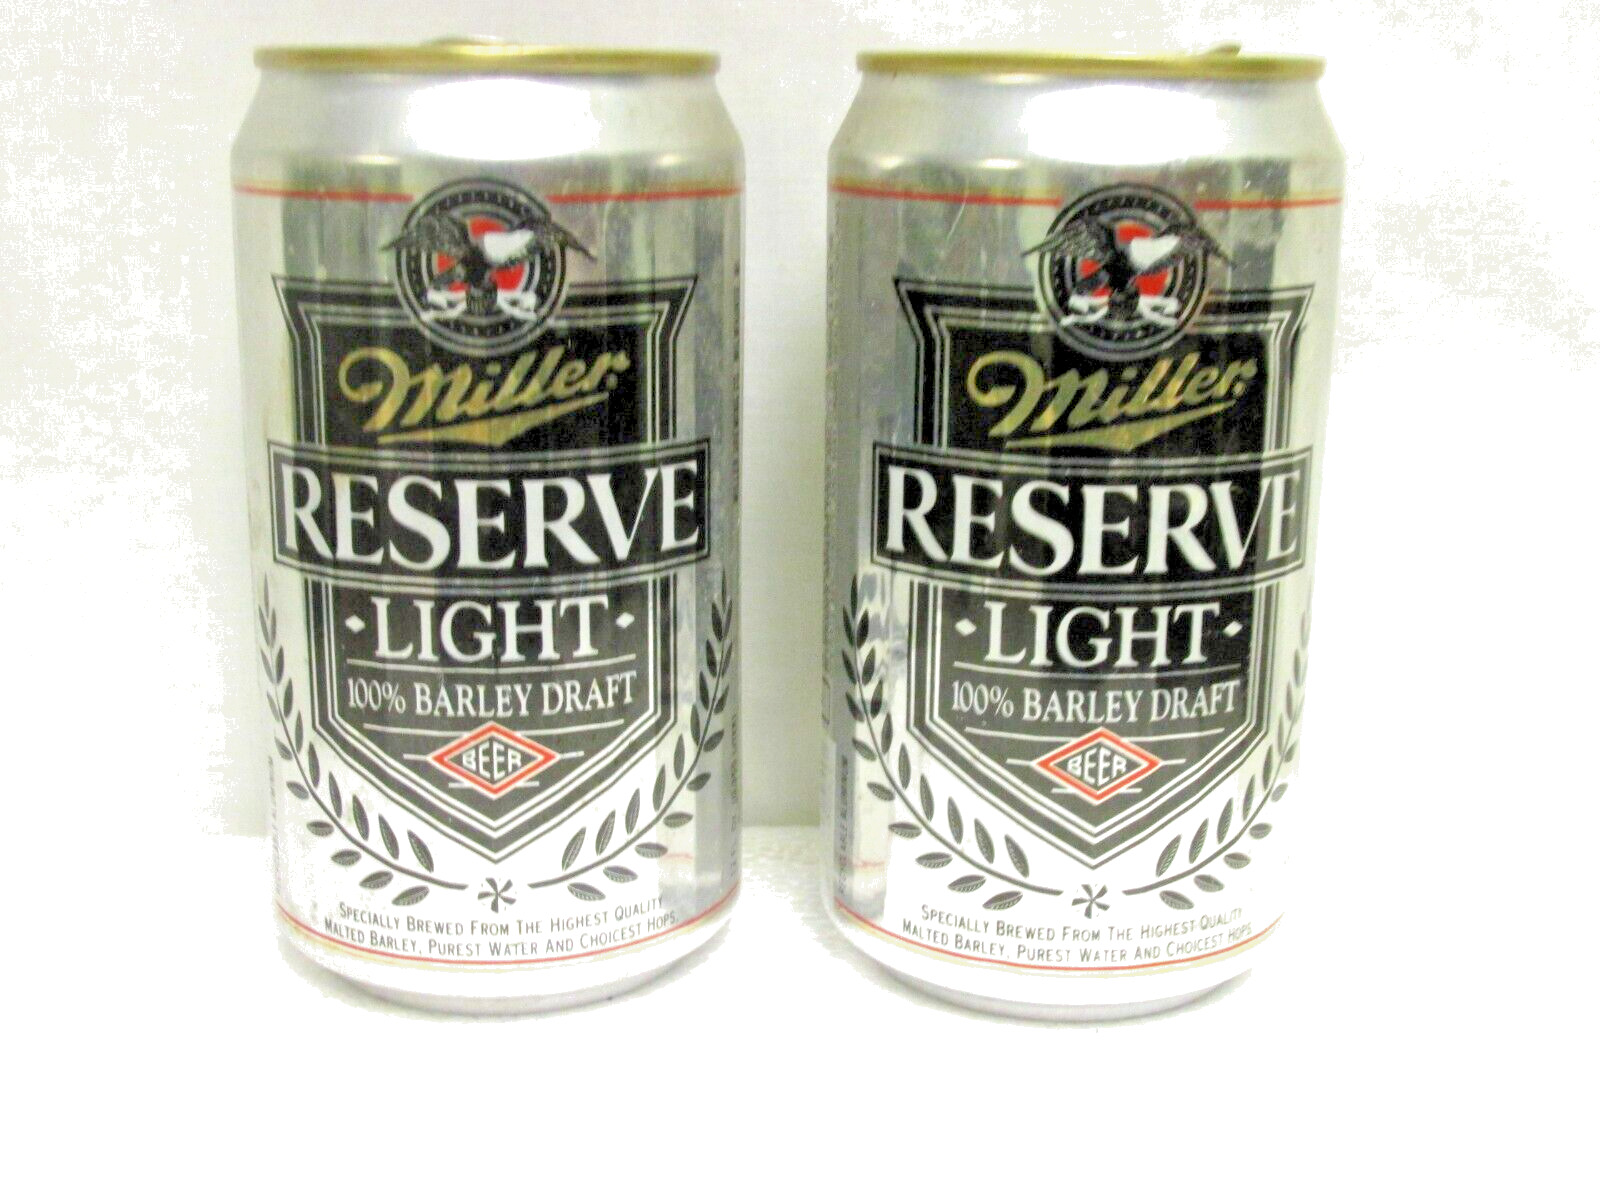 1993 Miller Reserve Light Beer Cans Ribbed / Fluted Aluminum (2) 12 Oz. Cans